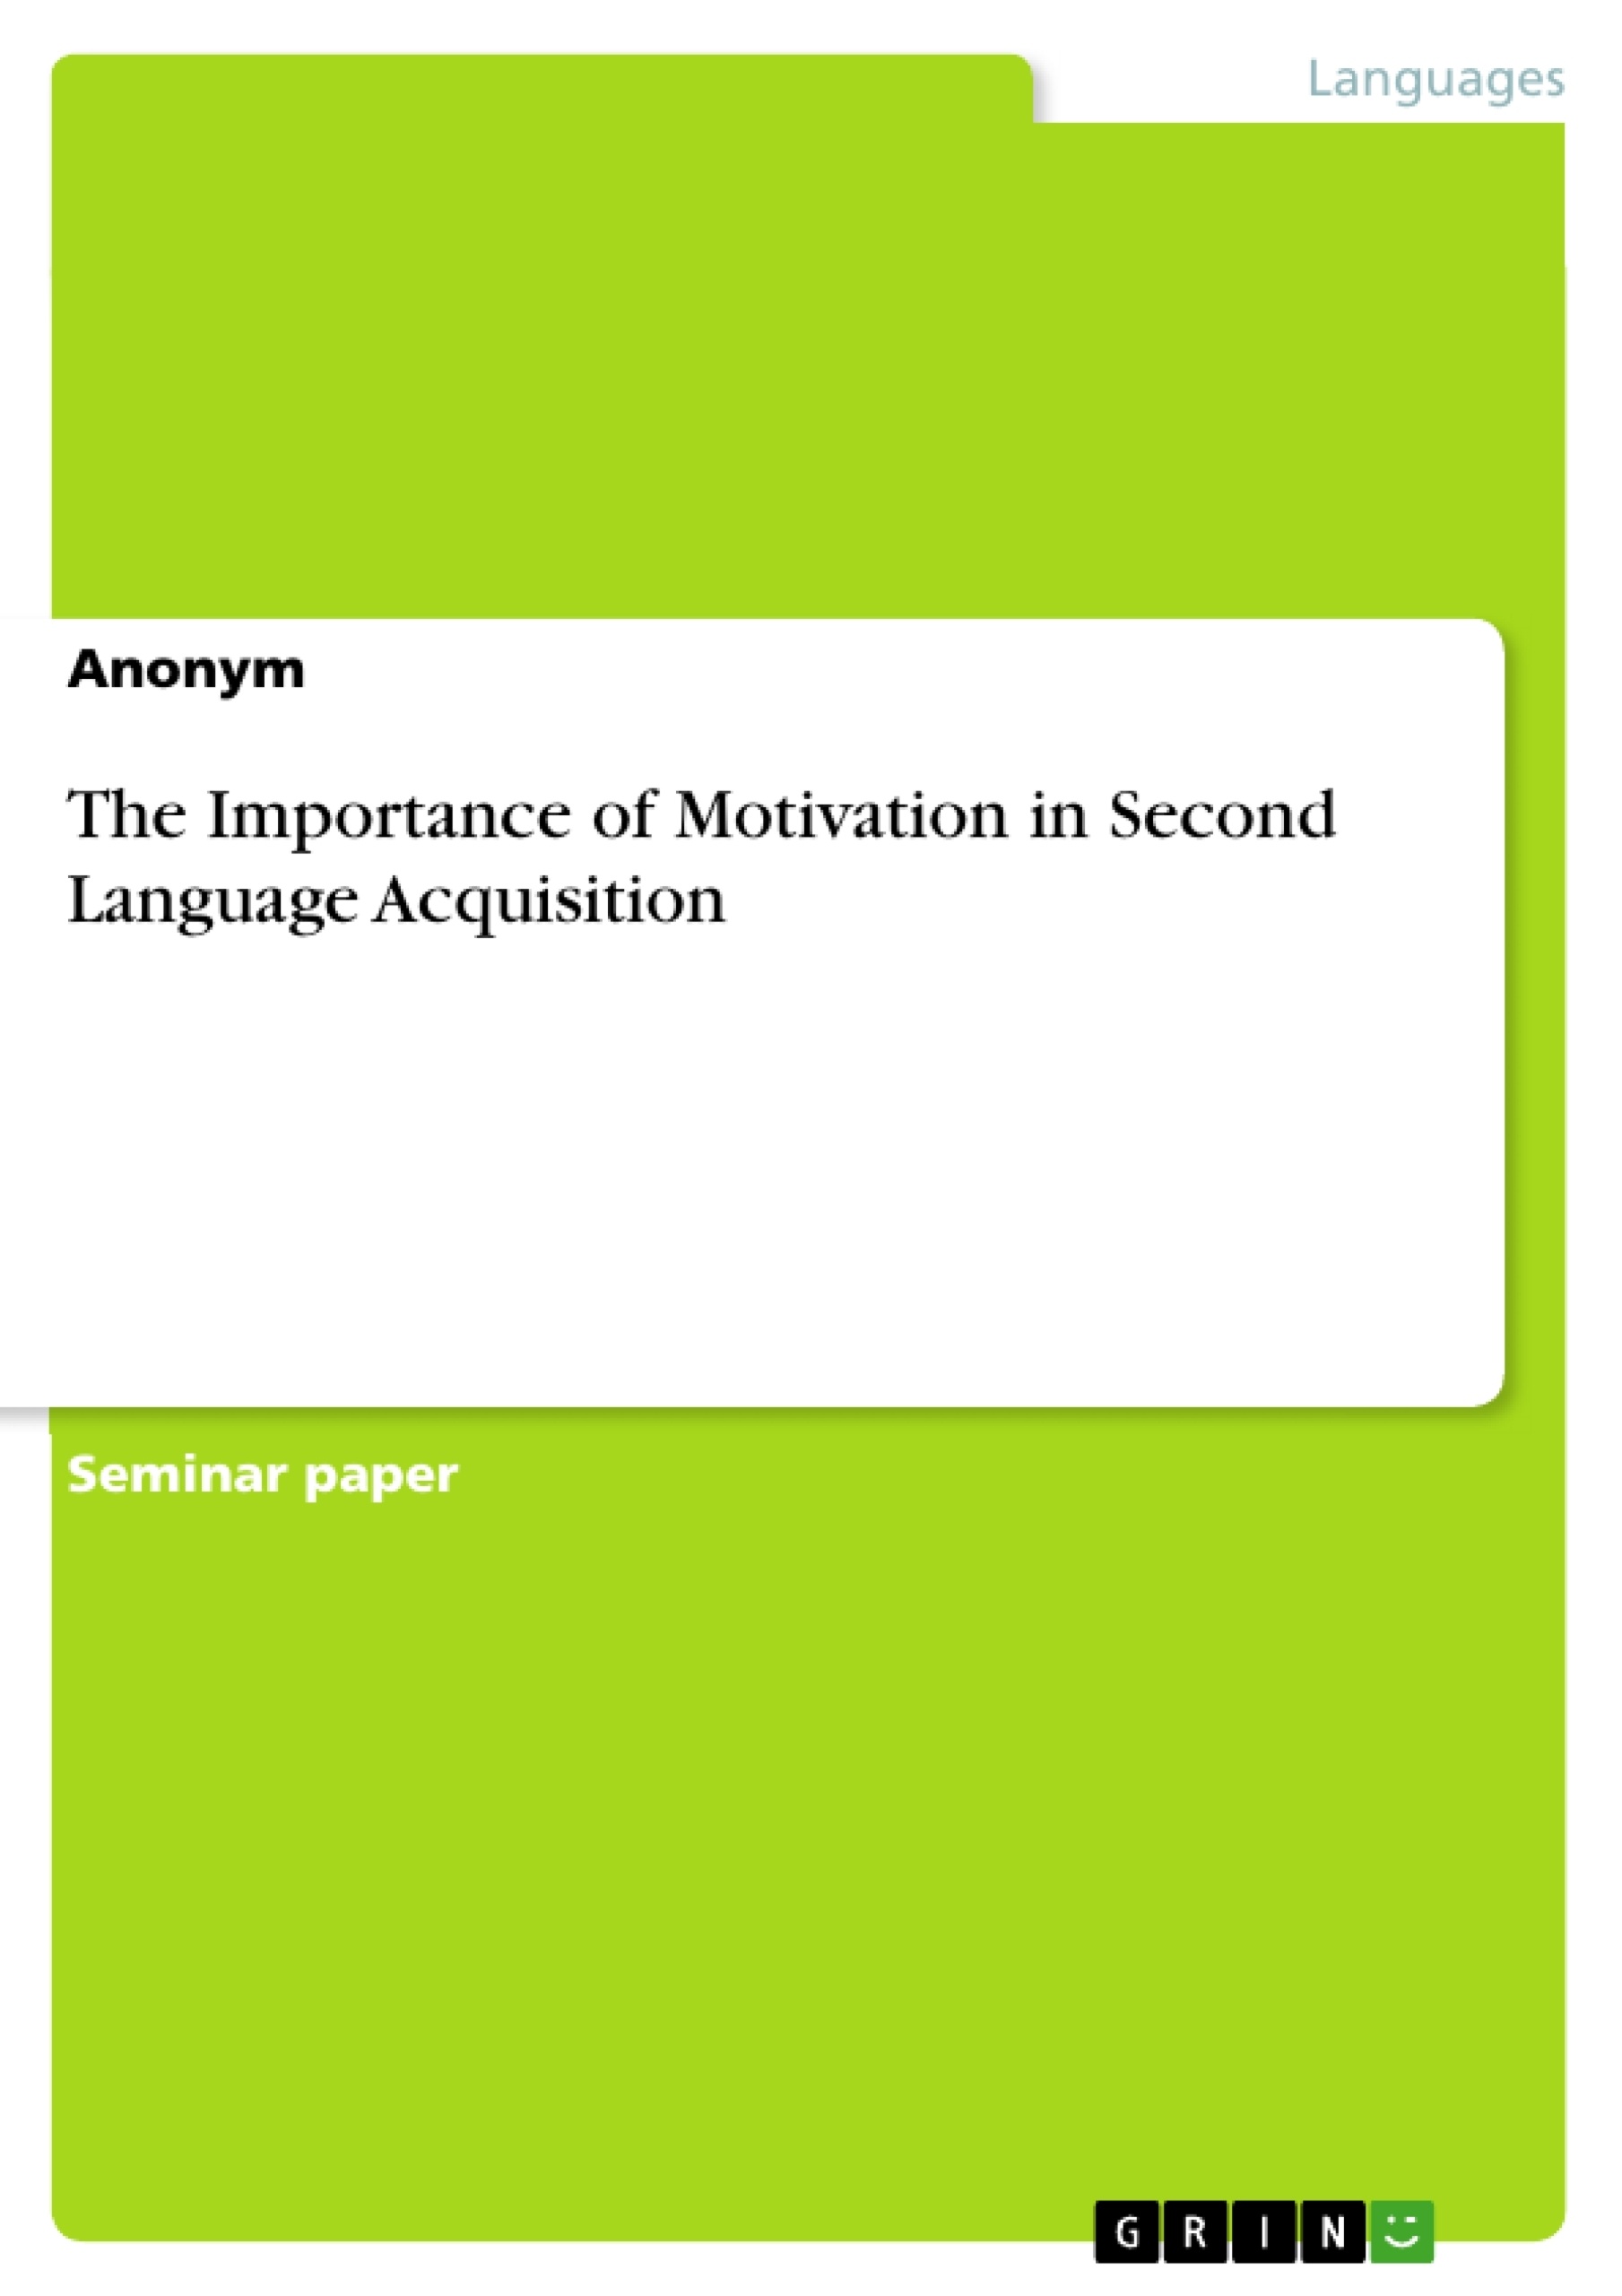 Title: The Importance of Motivation in Second Language Acquisition